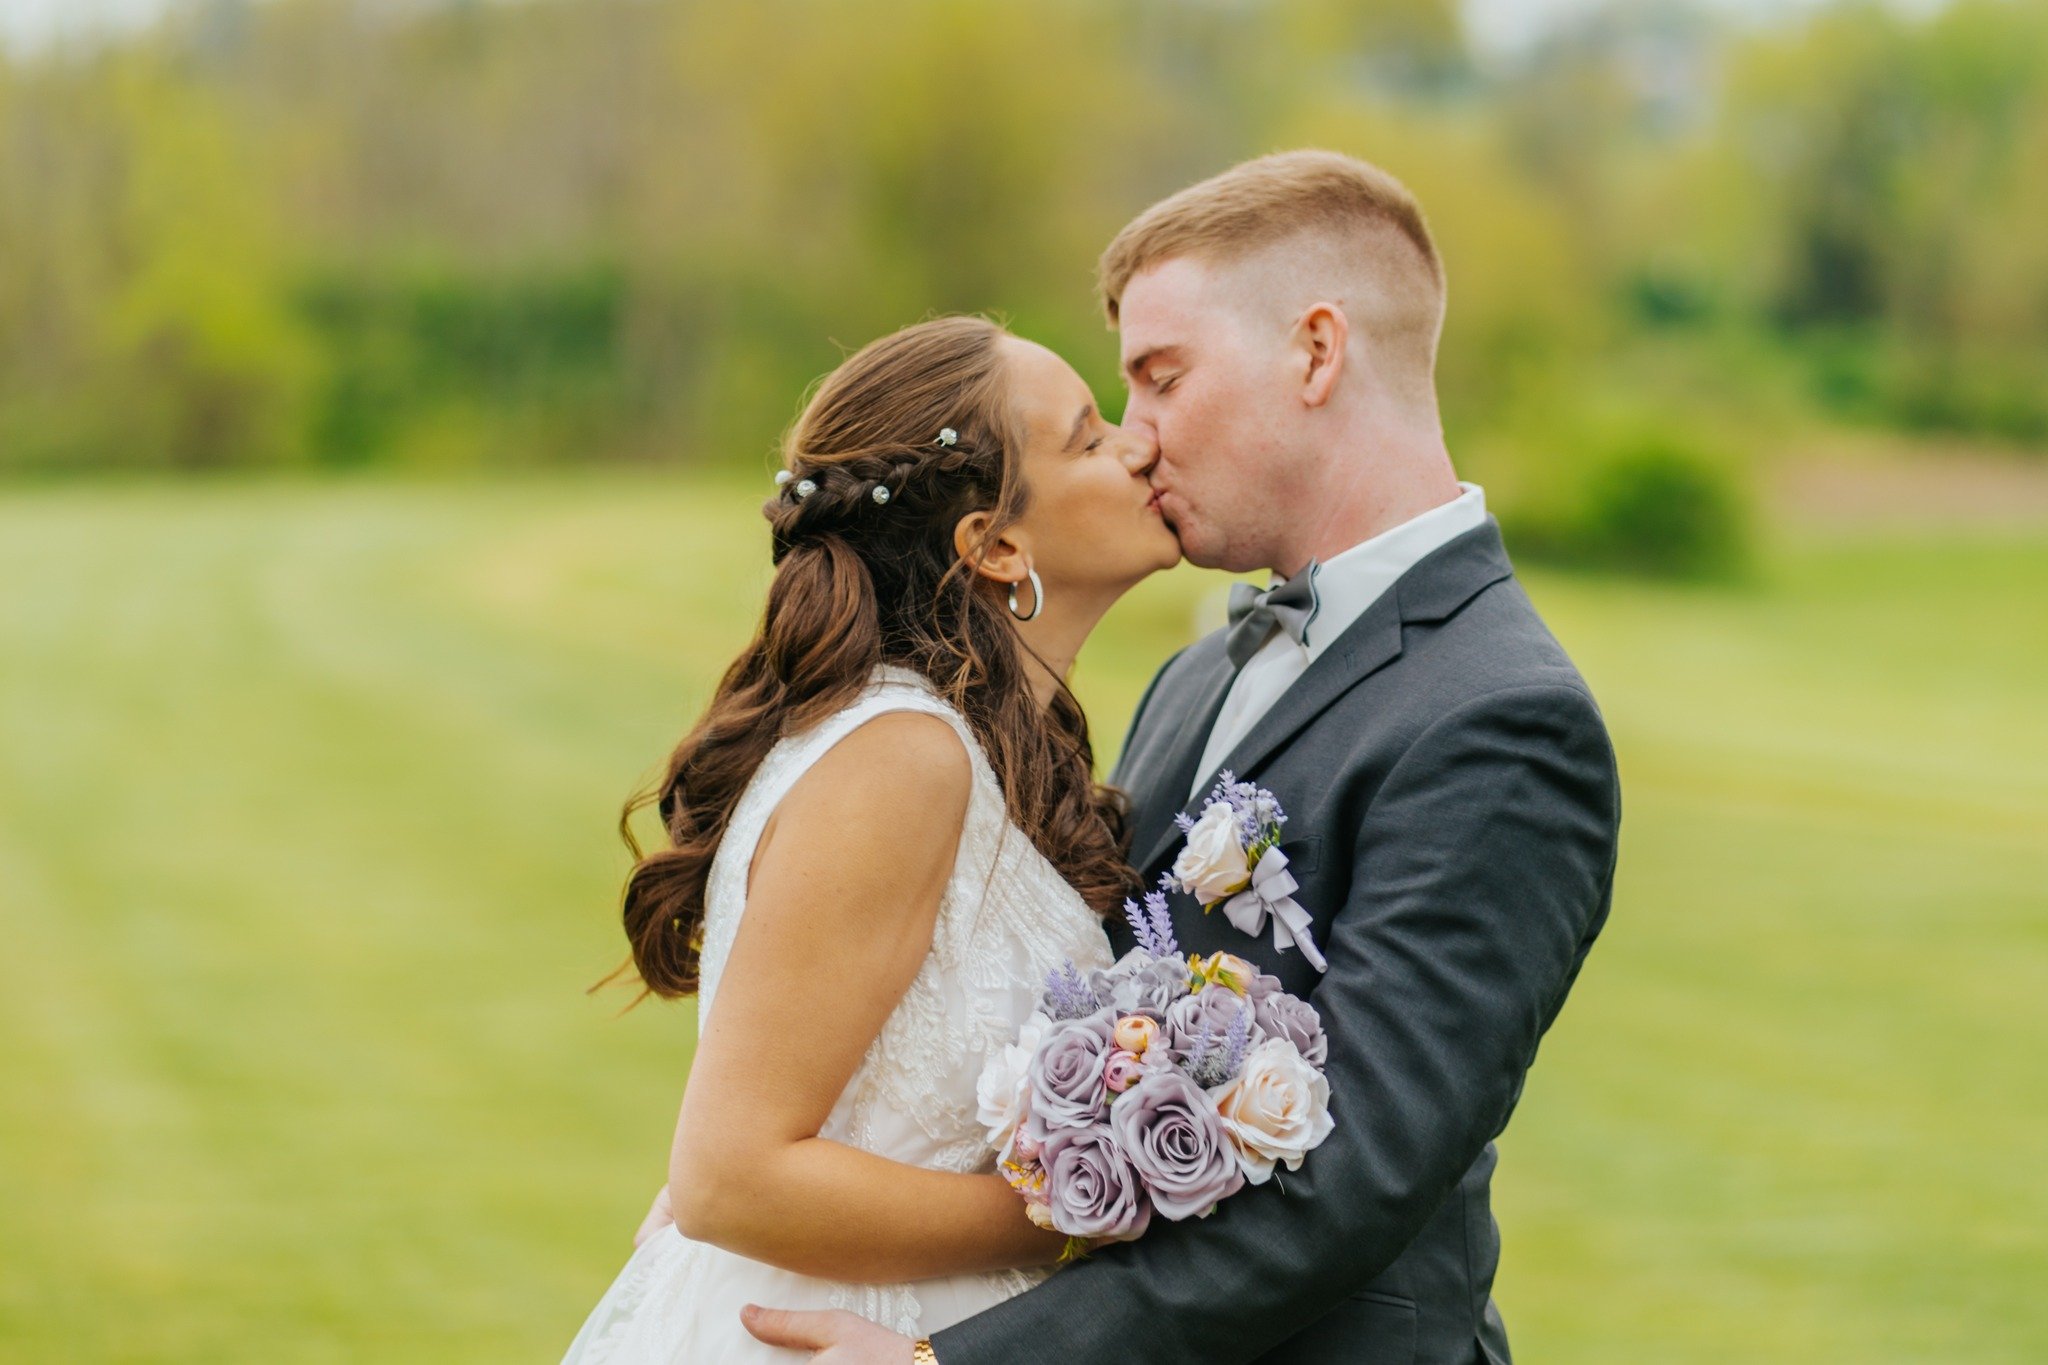 Spring colors in Lancaster are just unmatched. Make sure you have a photographer that can capture them and not suppress them!

#weddingvideos #weddingphotography #weddingphoto #lancasterweddingphotography #lancasterwedding #lancasterweddings #wedding